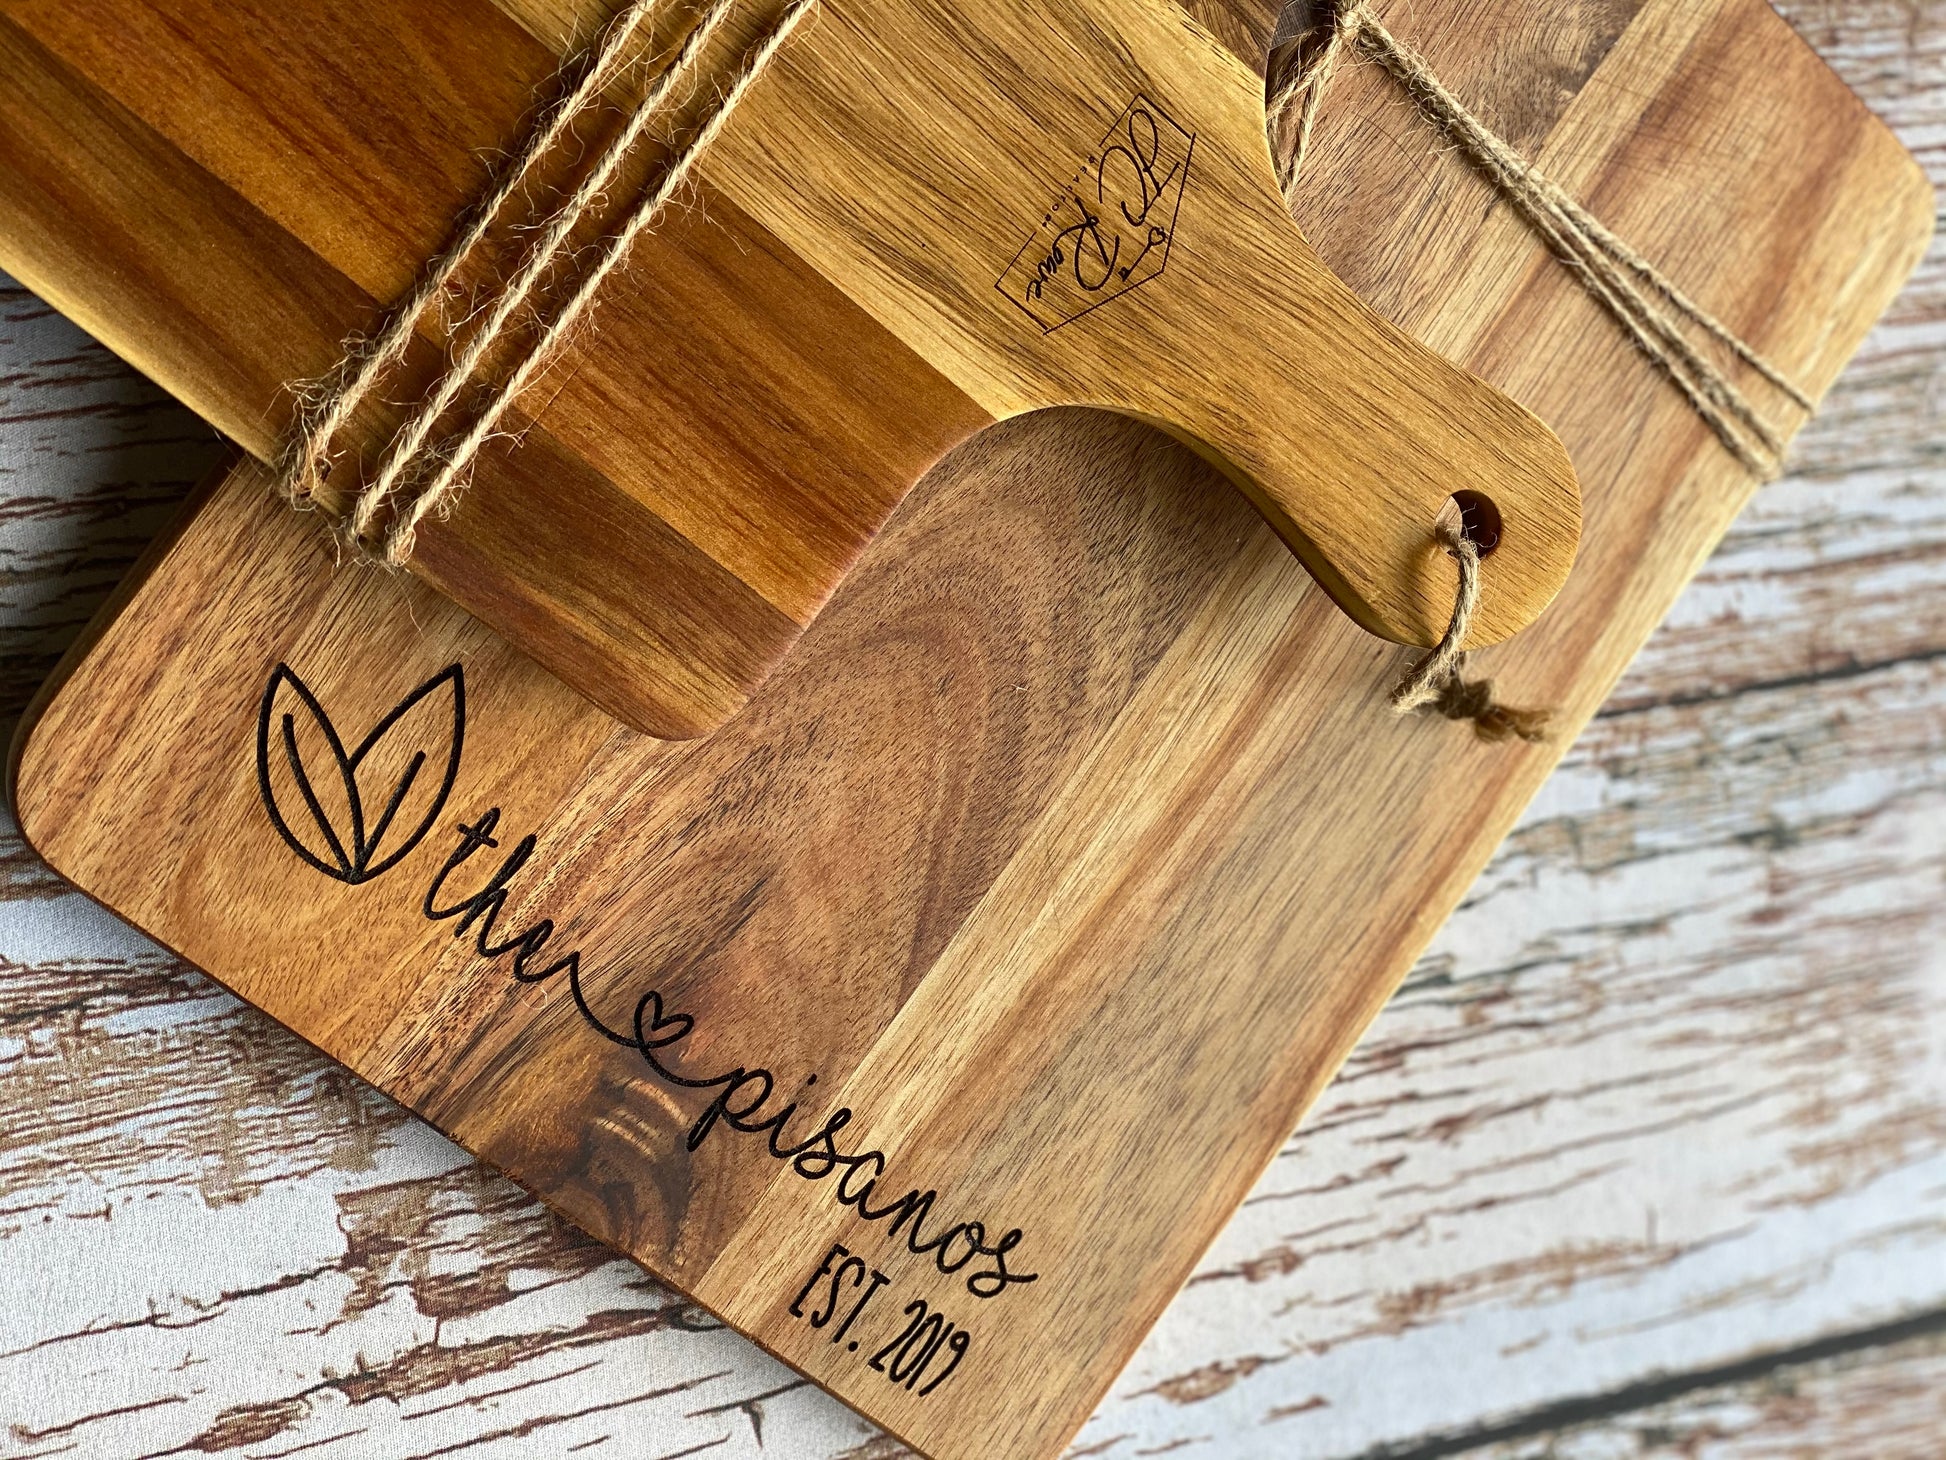 Handcrafted Wooden Chopping Boards For Every Occasion - Ellementry